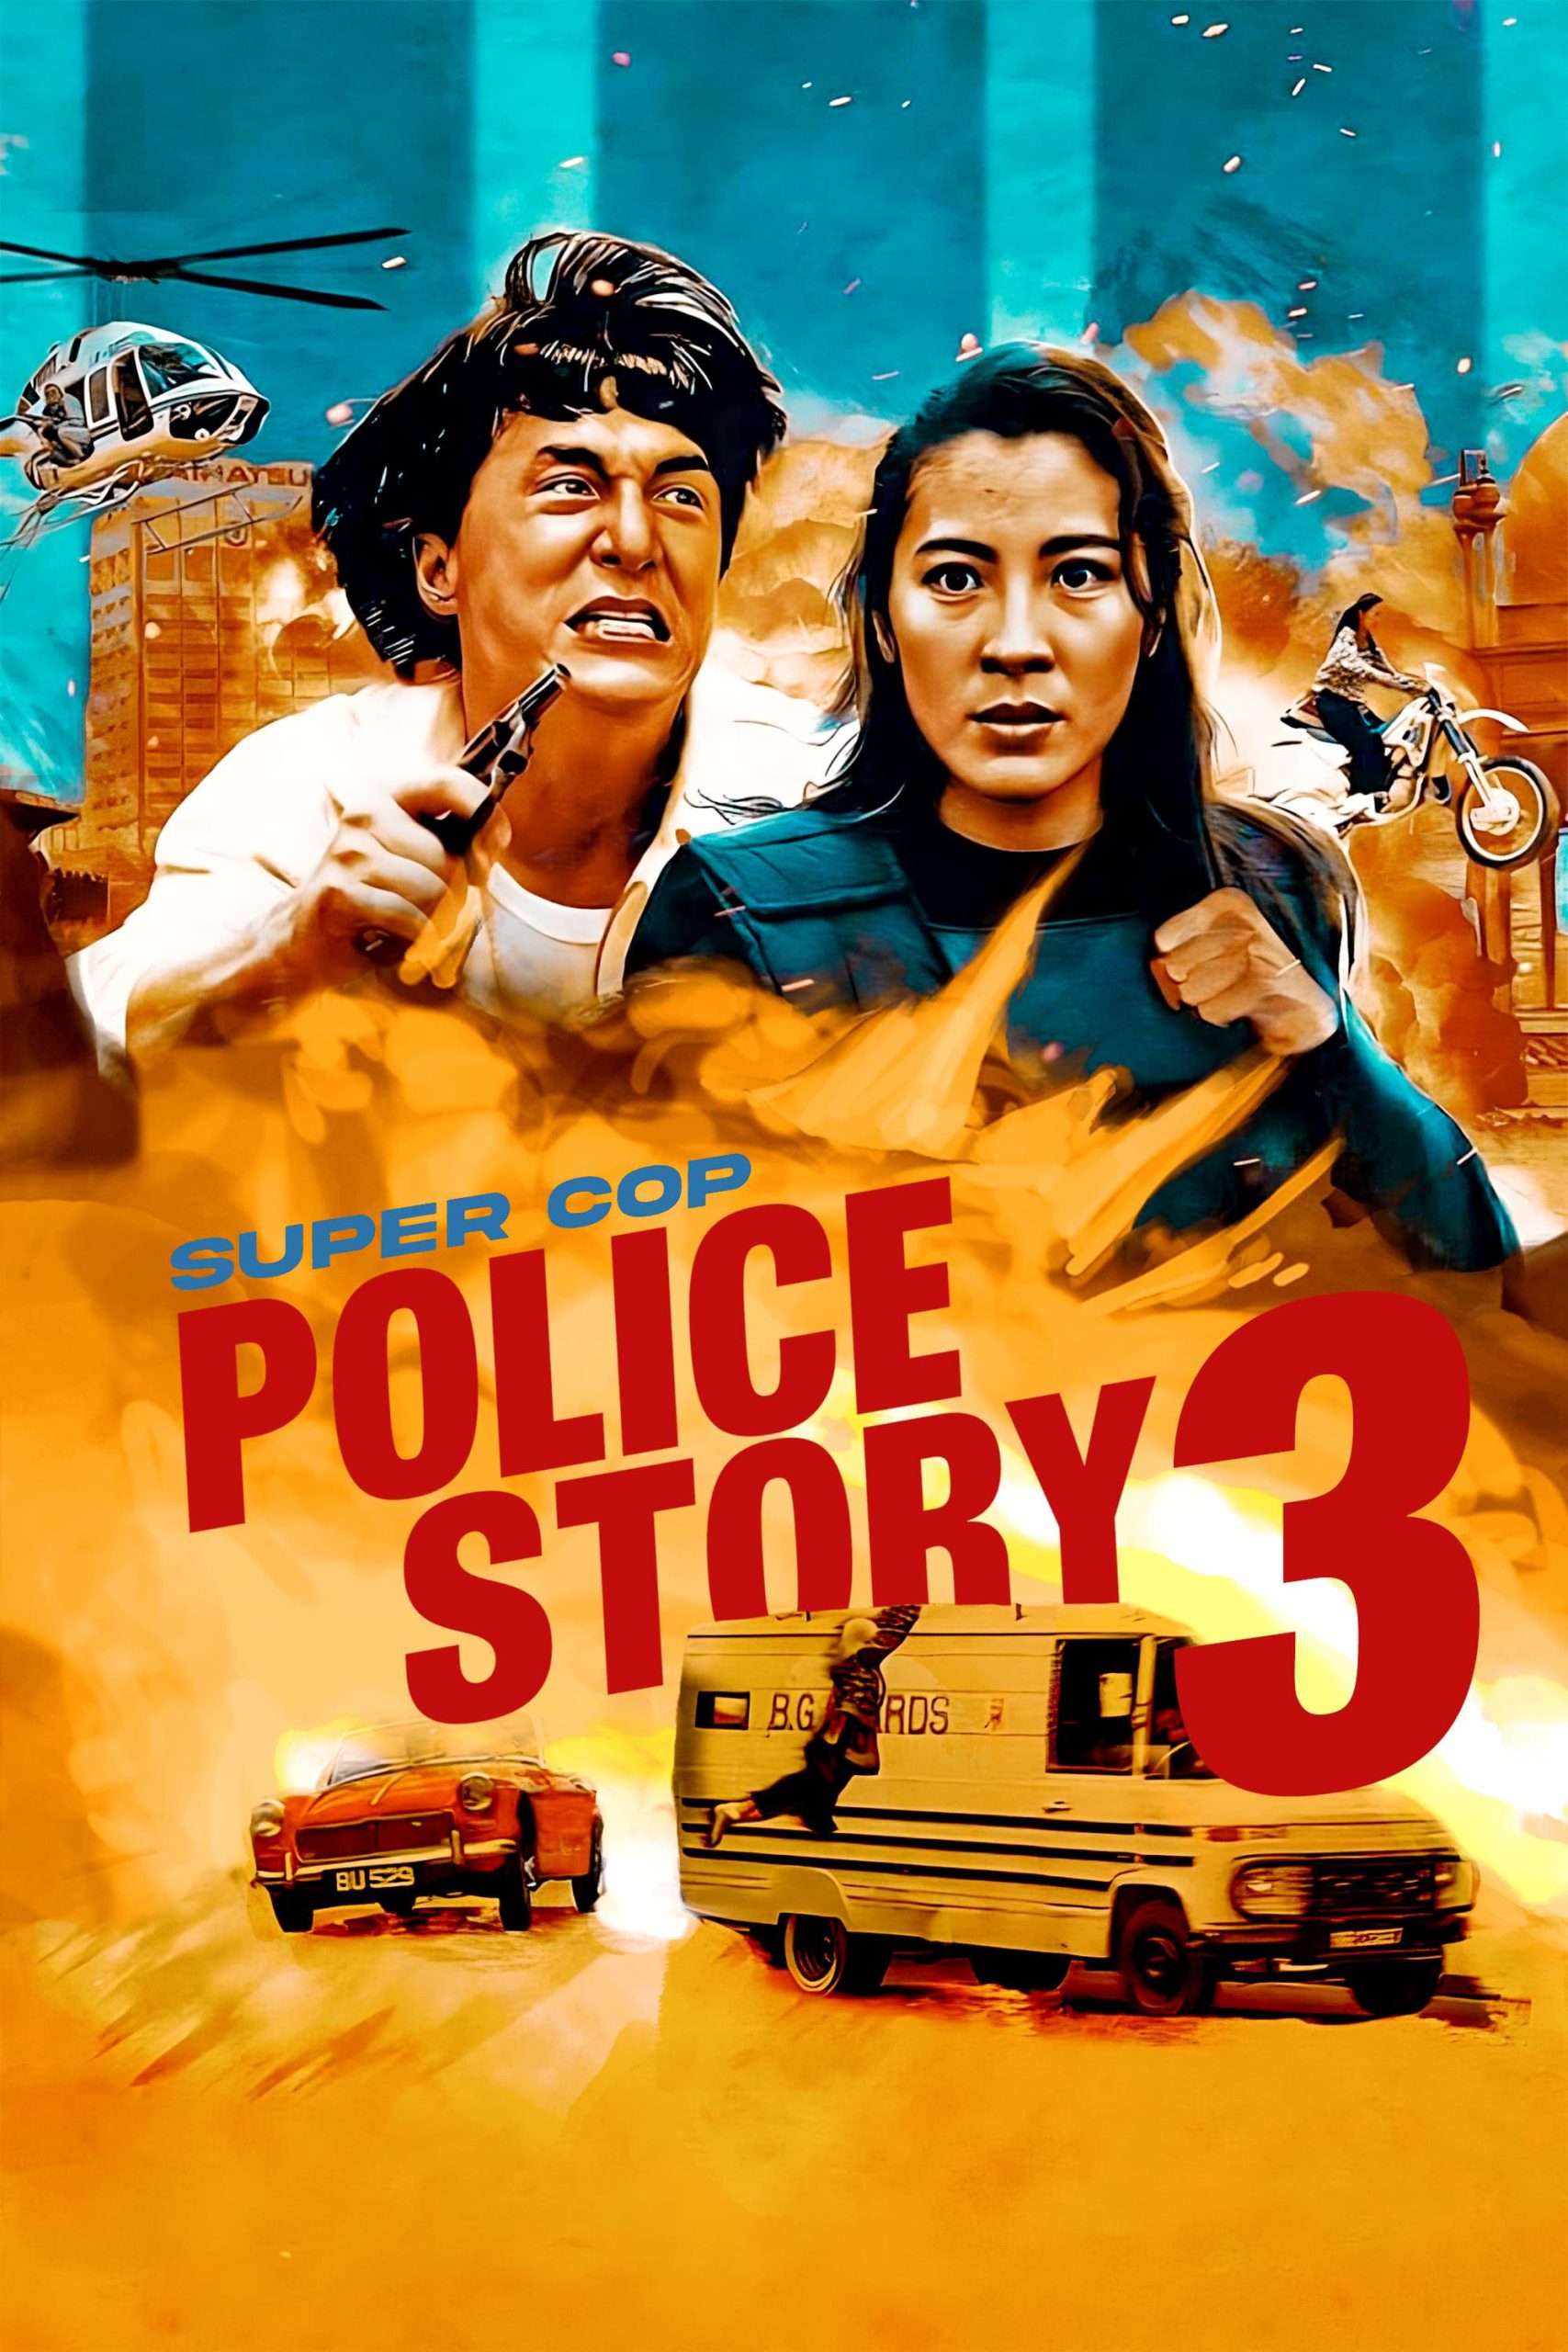 Police Story 3: Supercop  [HD] (1992)